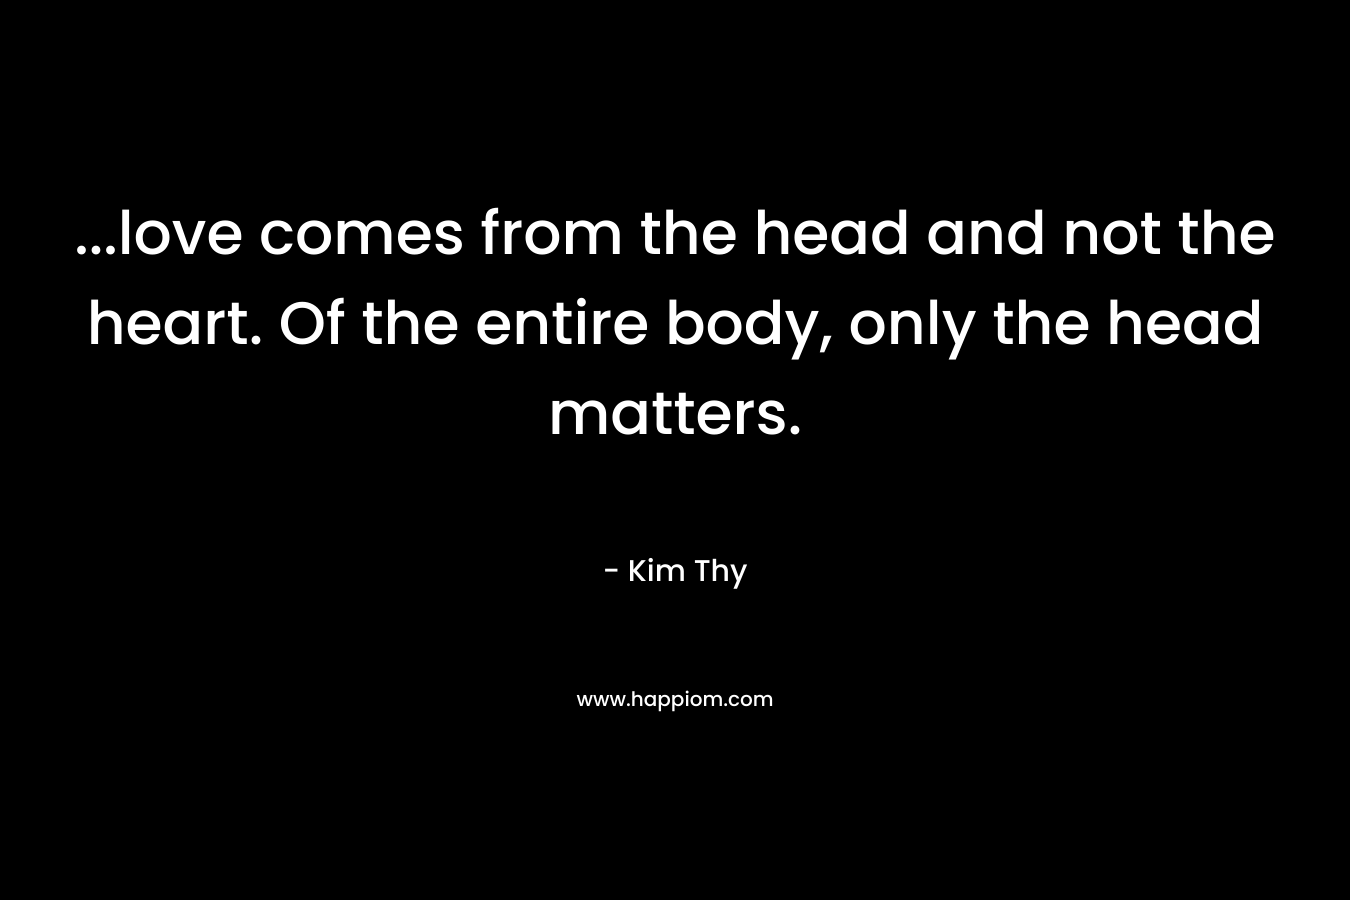 ...love comes from the head and not the heart. Of the entire body, only the head matters.